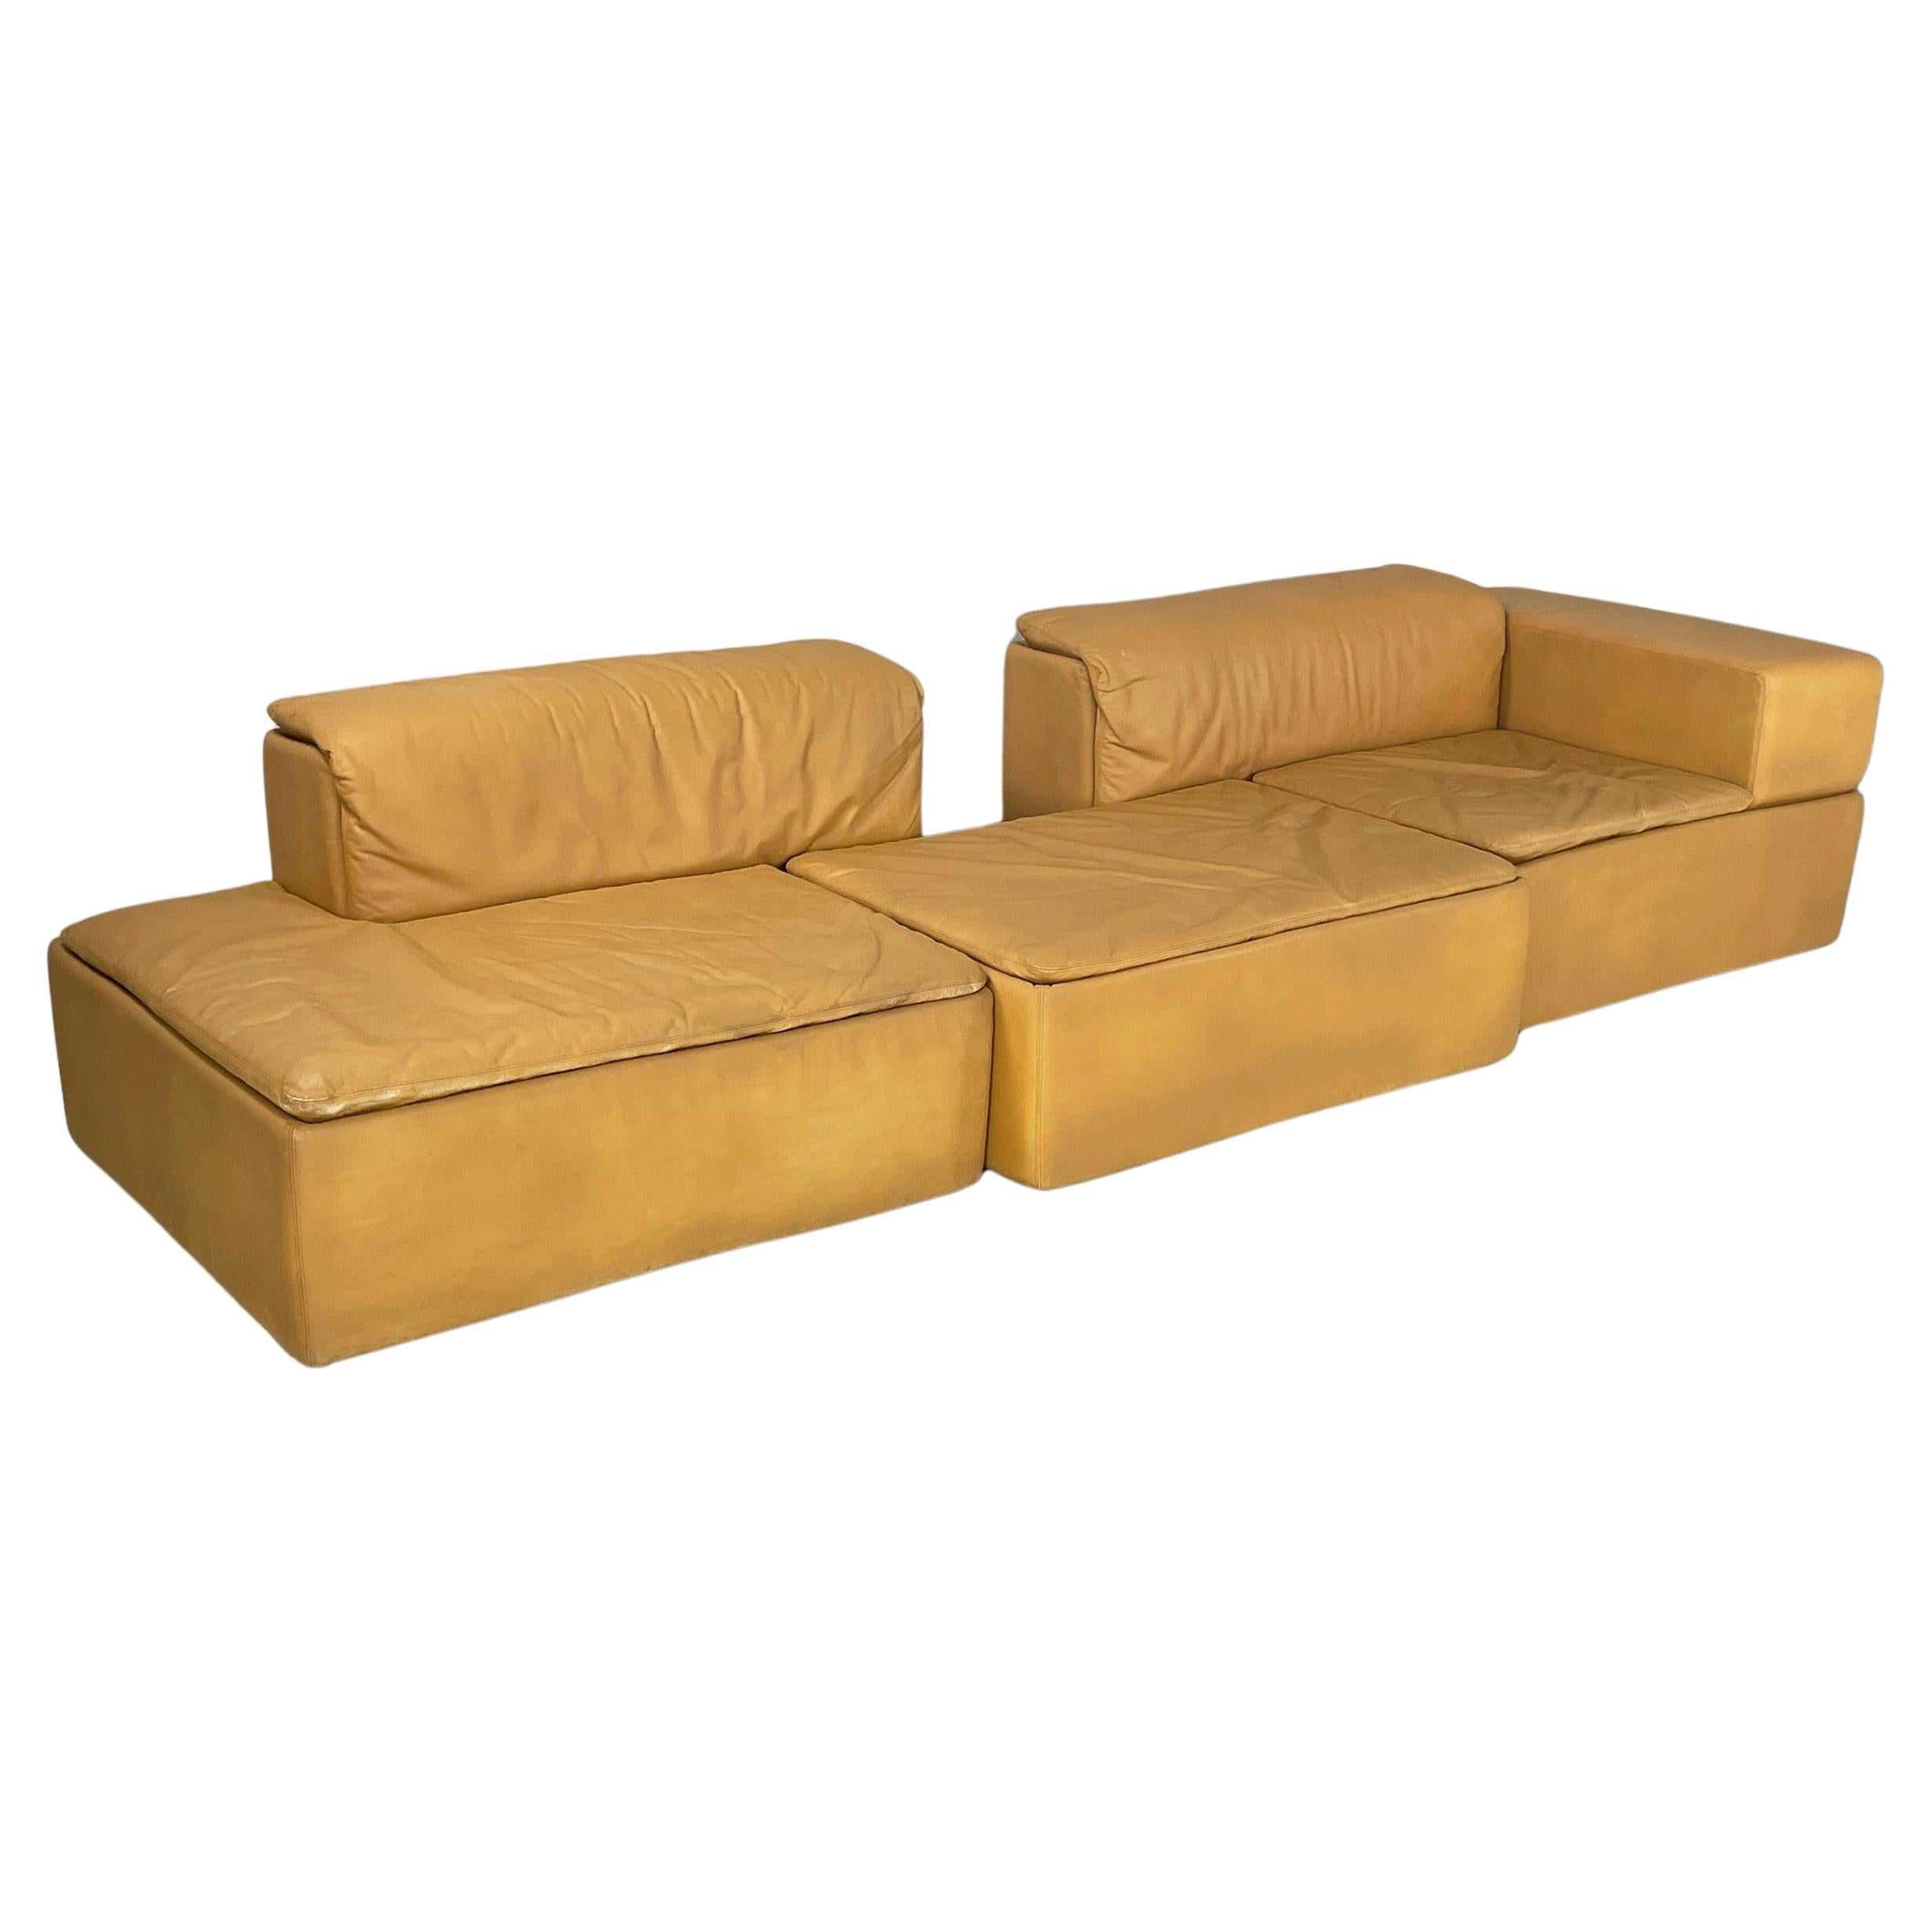 Italian modern Brown leather modular sofa Paione by Salocchi for Sormani, 1970s For Sale